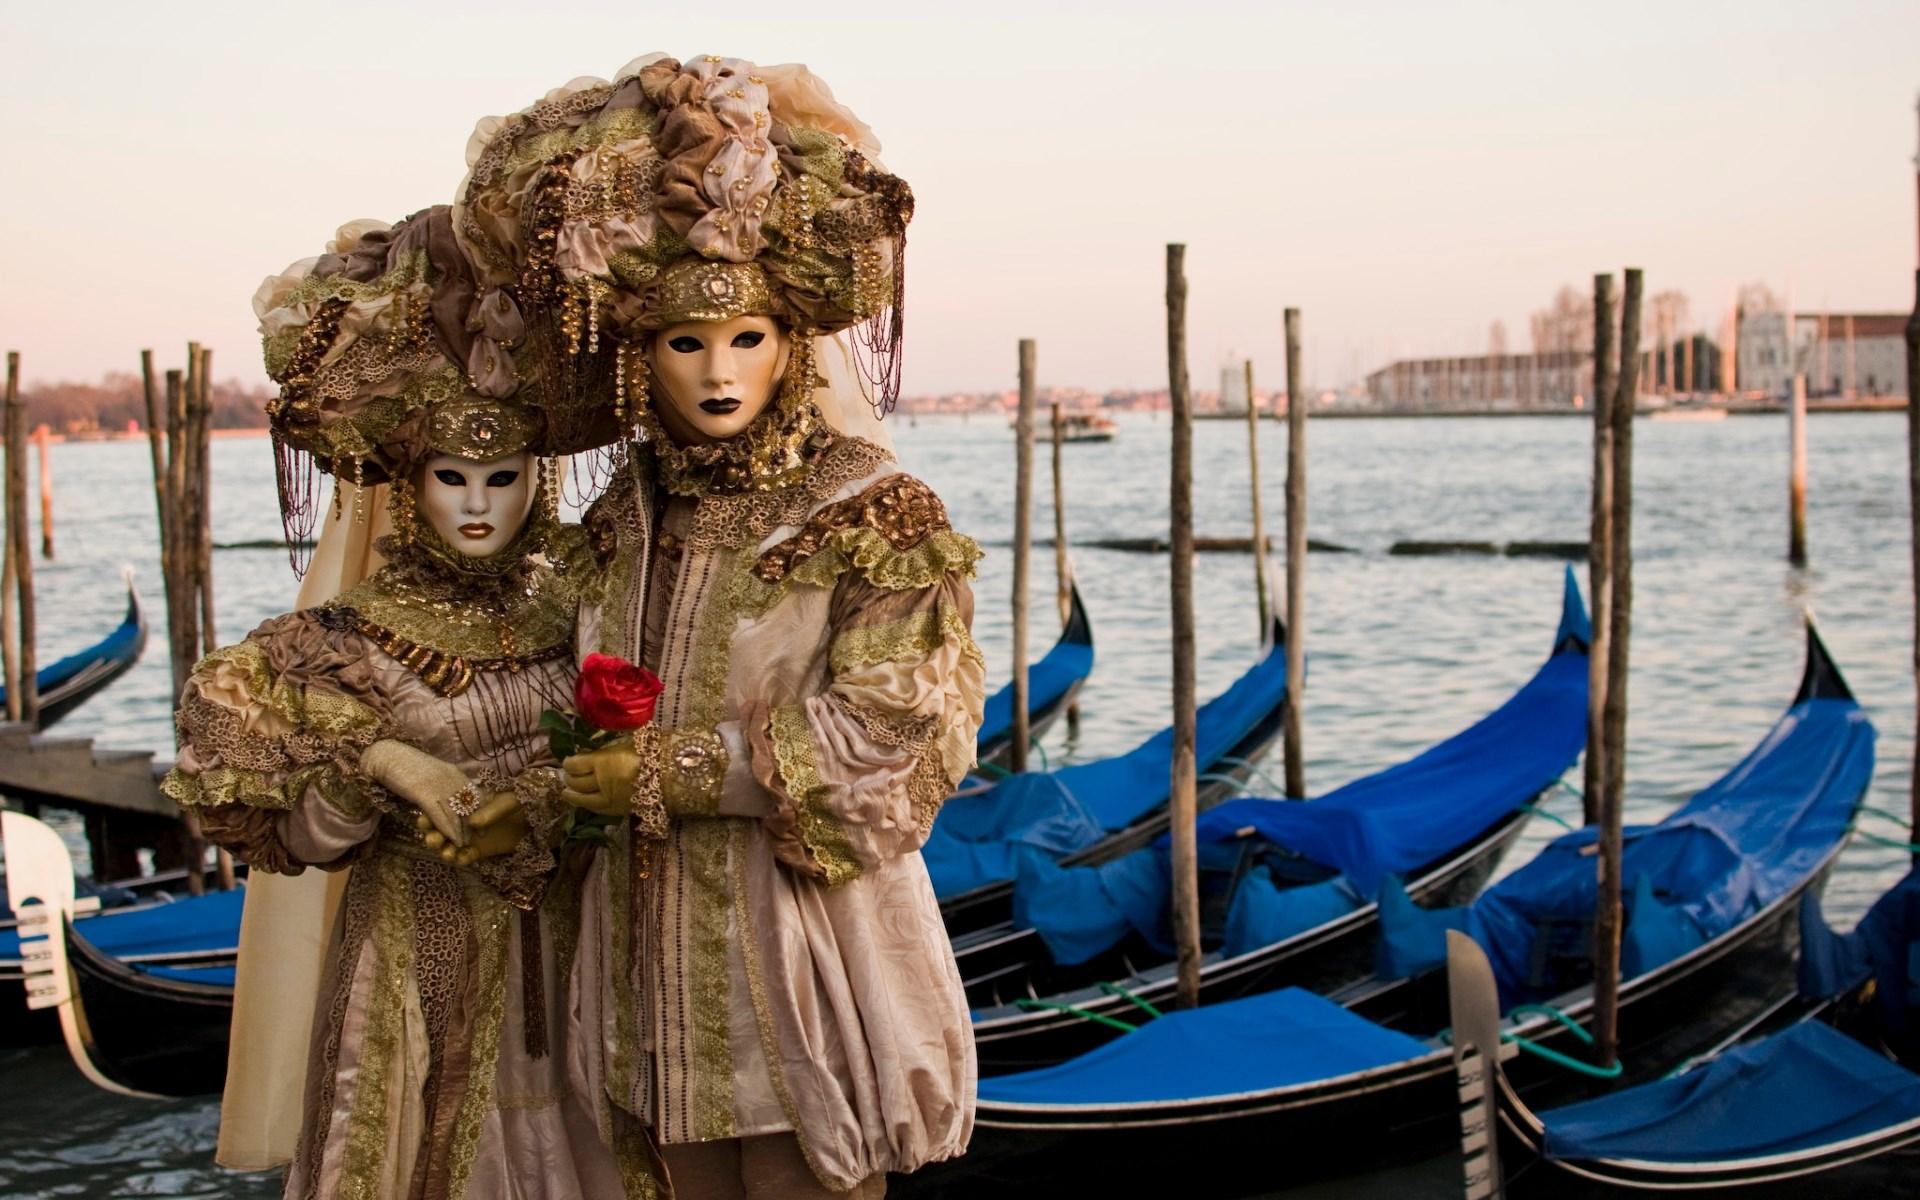 Carnival of venice wallpapers pack p hd,